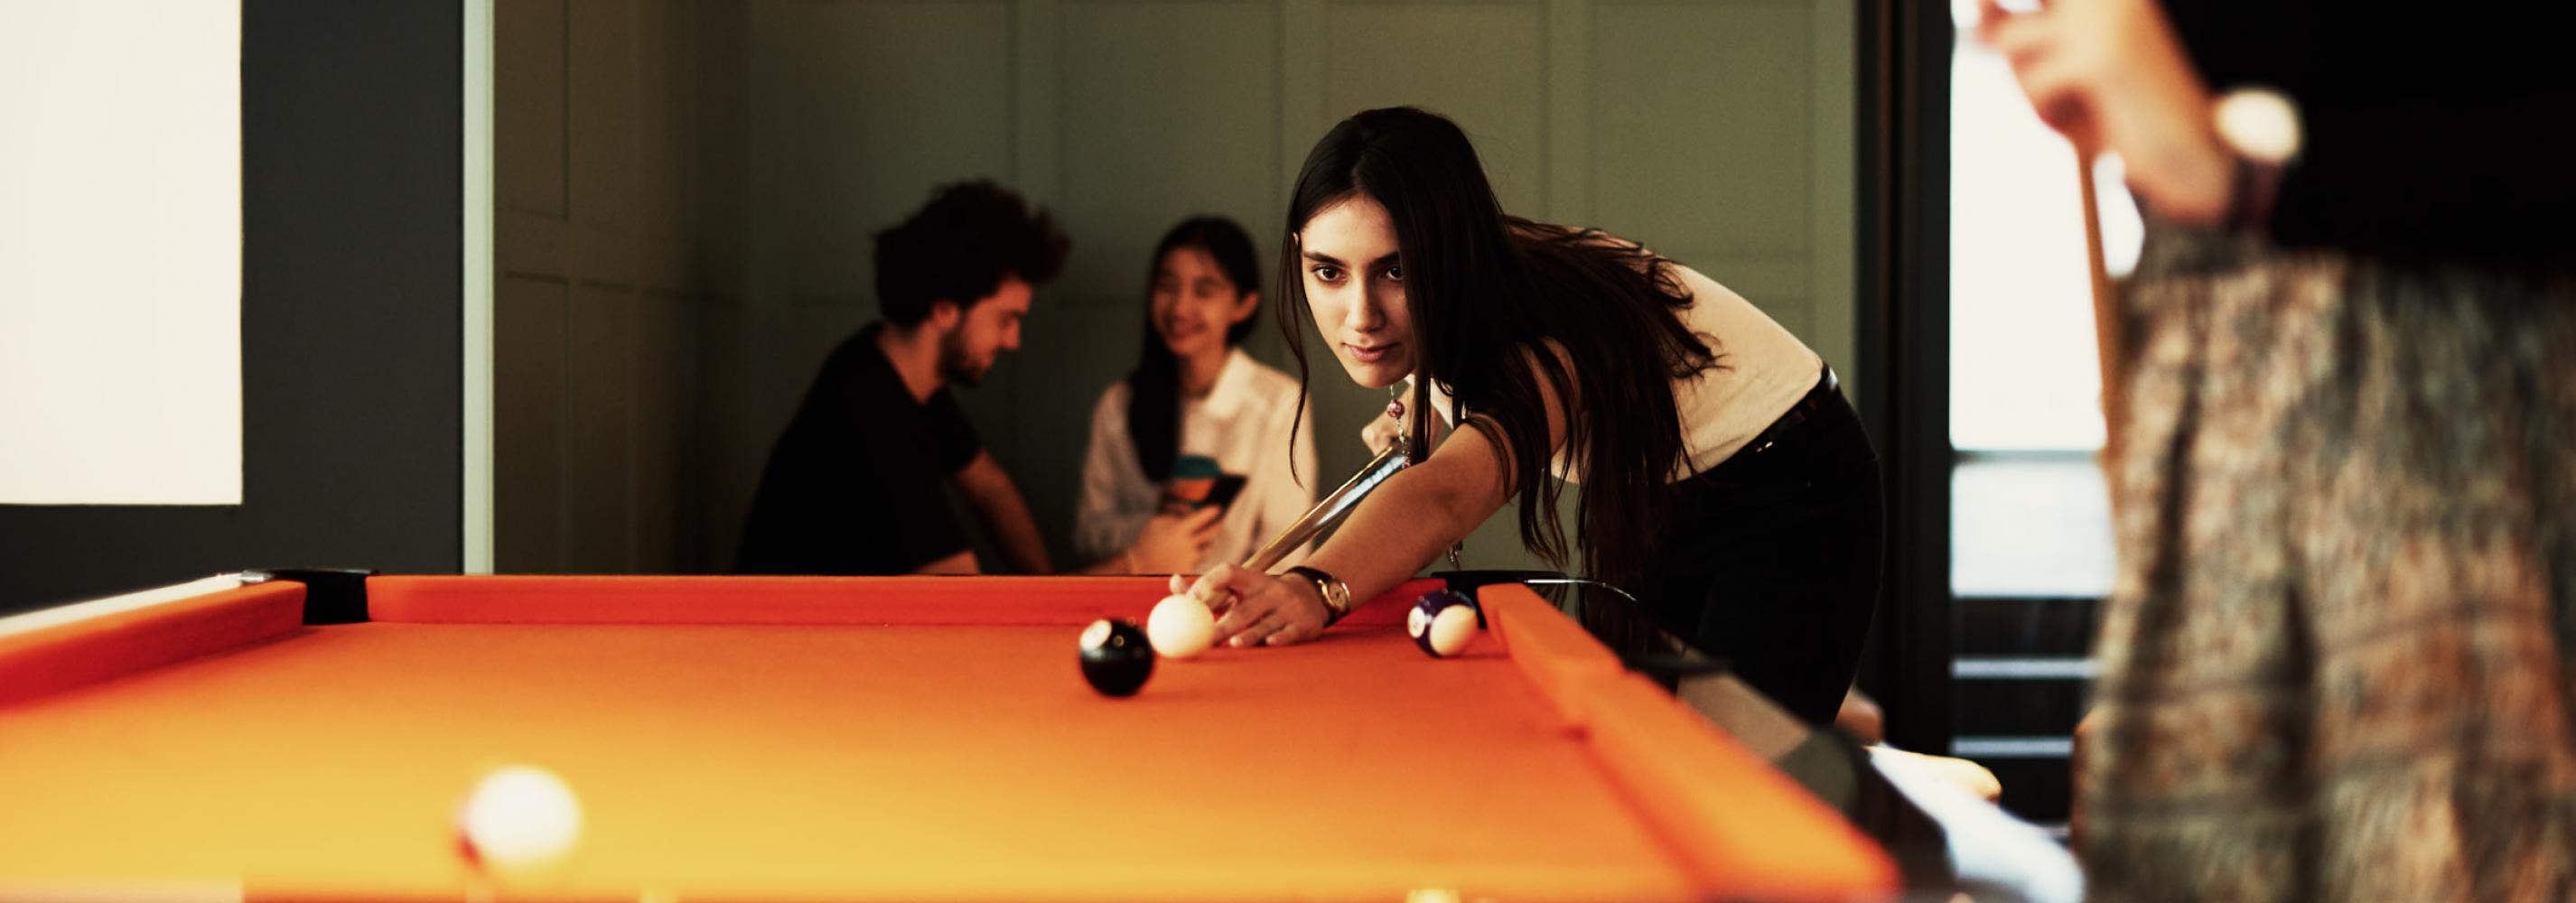 Students playing on a Pool table